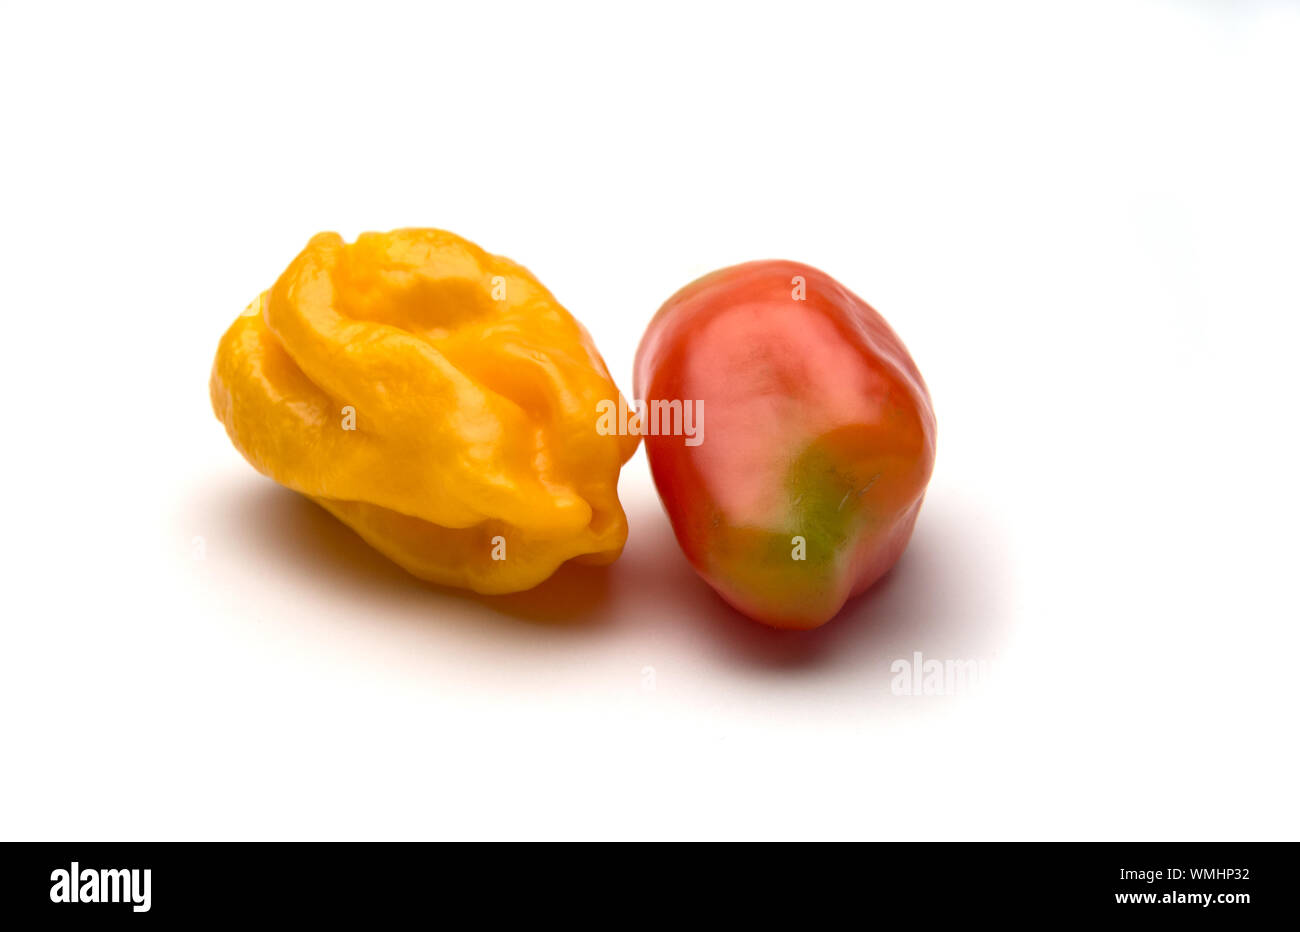 One yellow ripe  pepper and one  red ripe pepper isolated on white background. Selective focus. Stock Photo